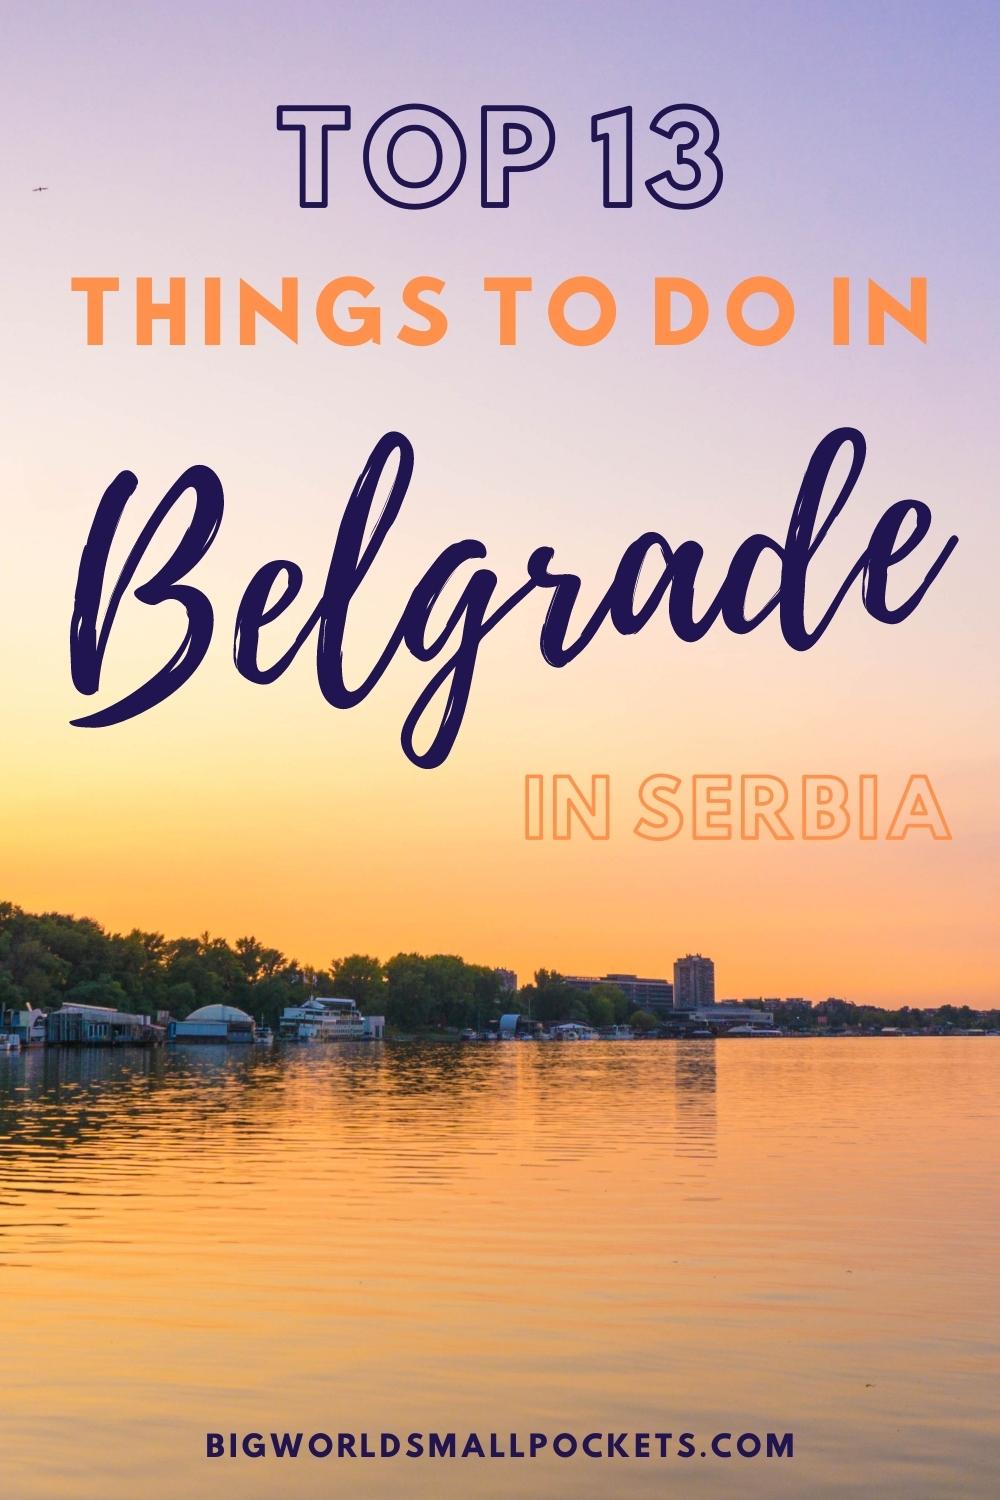 Top 13 Things to Do in Belgrade in Serbia